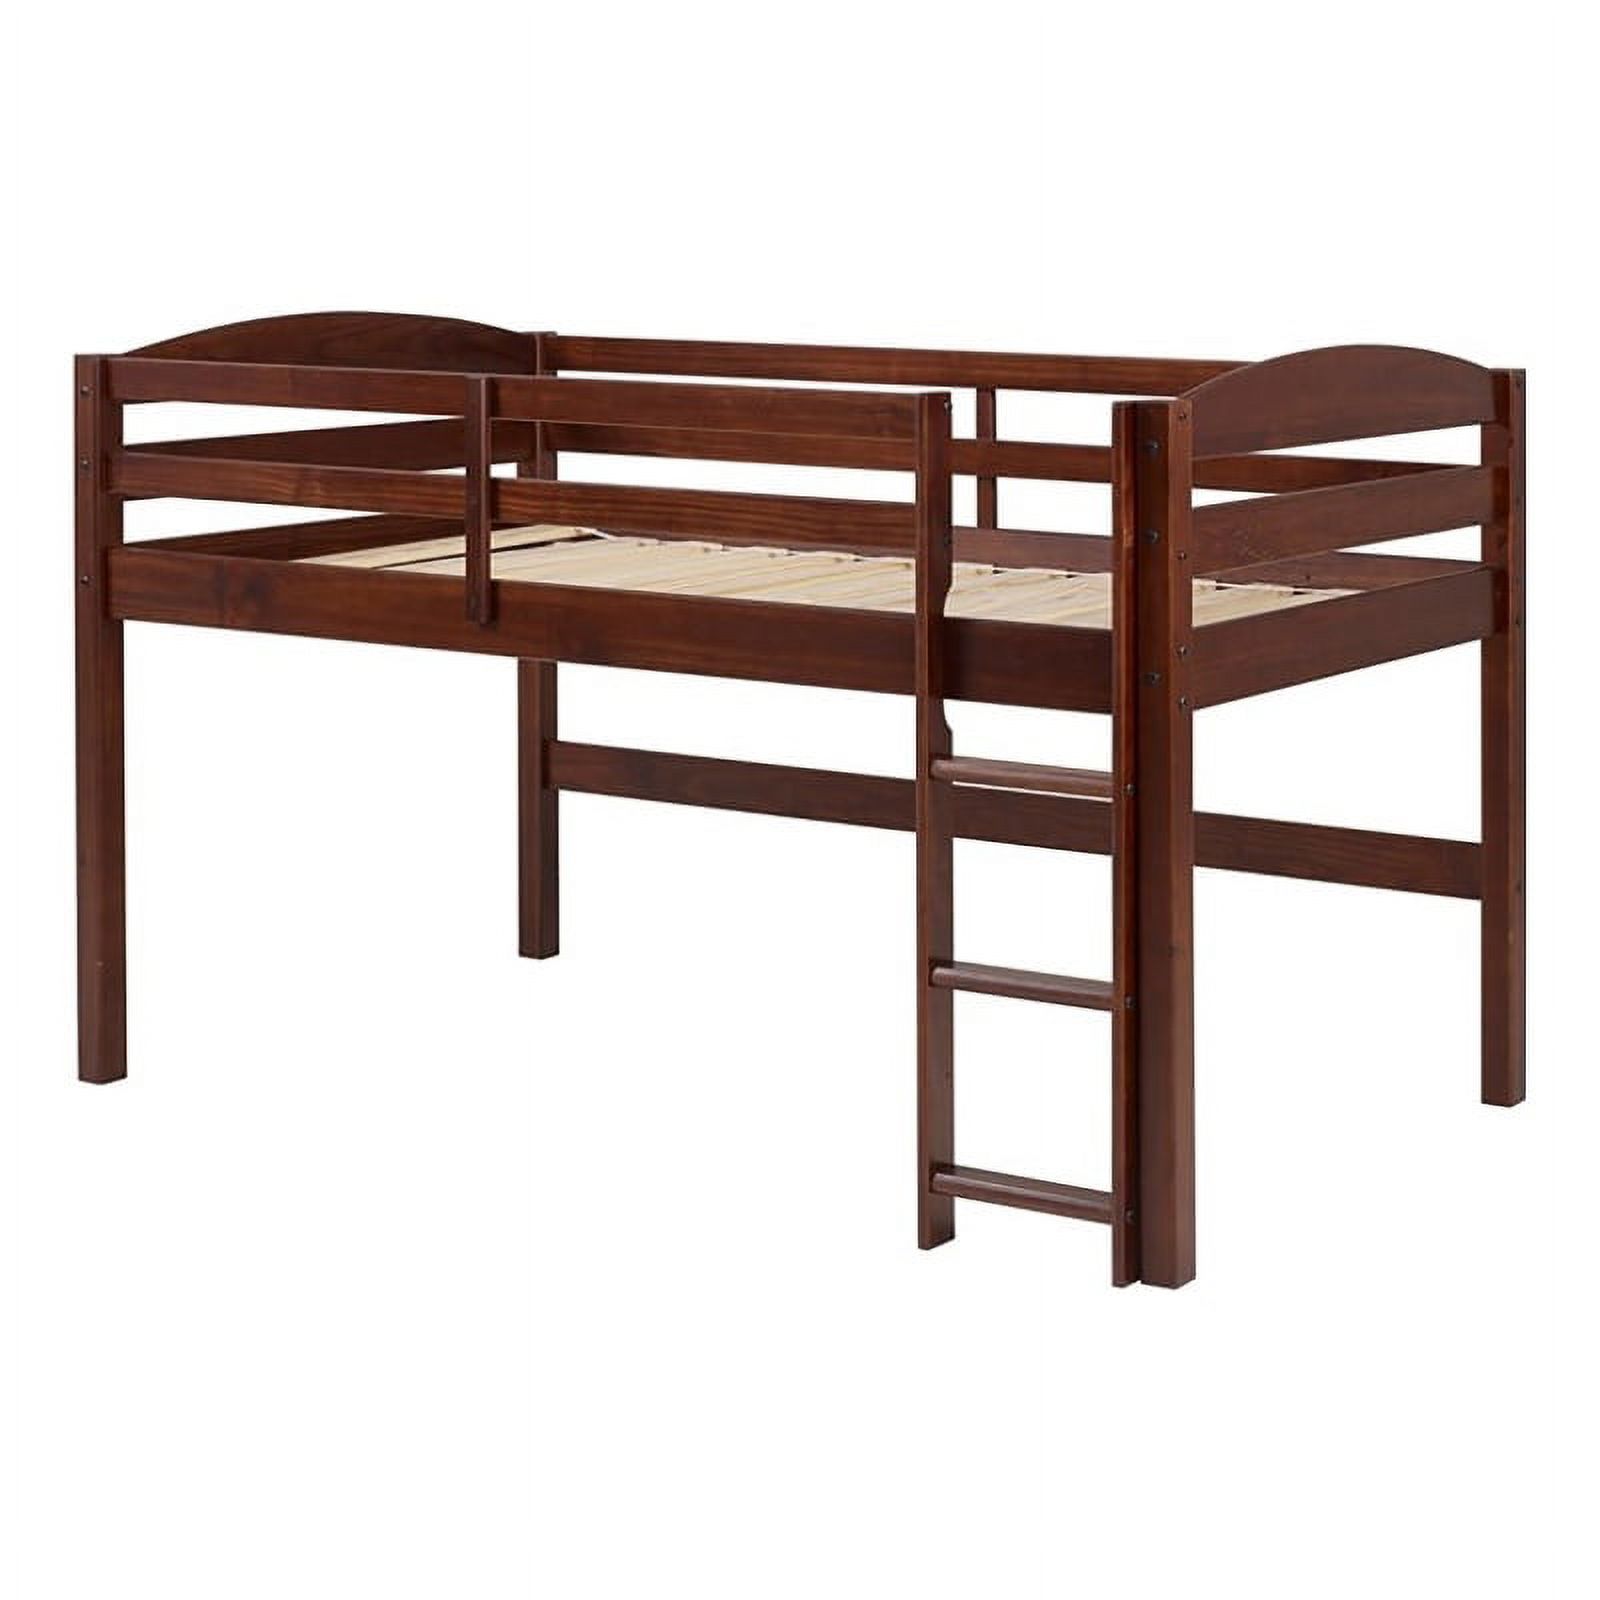 Pemberly Row Transitional Solid Wood Twin Low Loft Bed in Walnut Brown - image 1 of 10